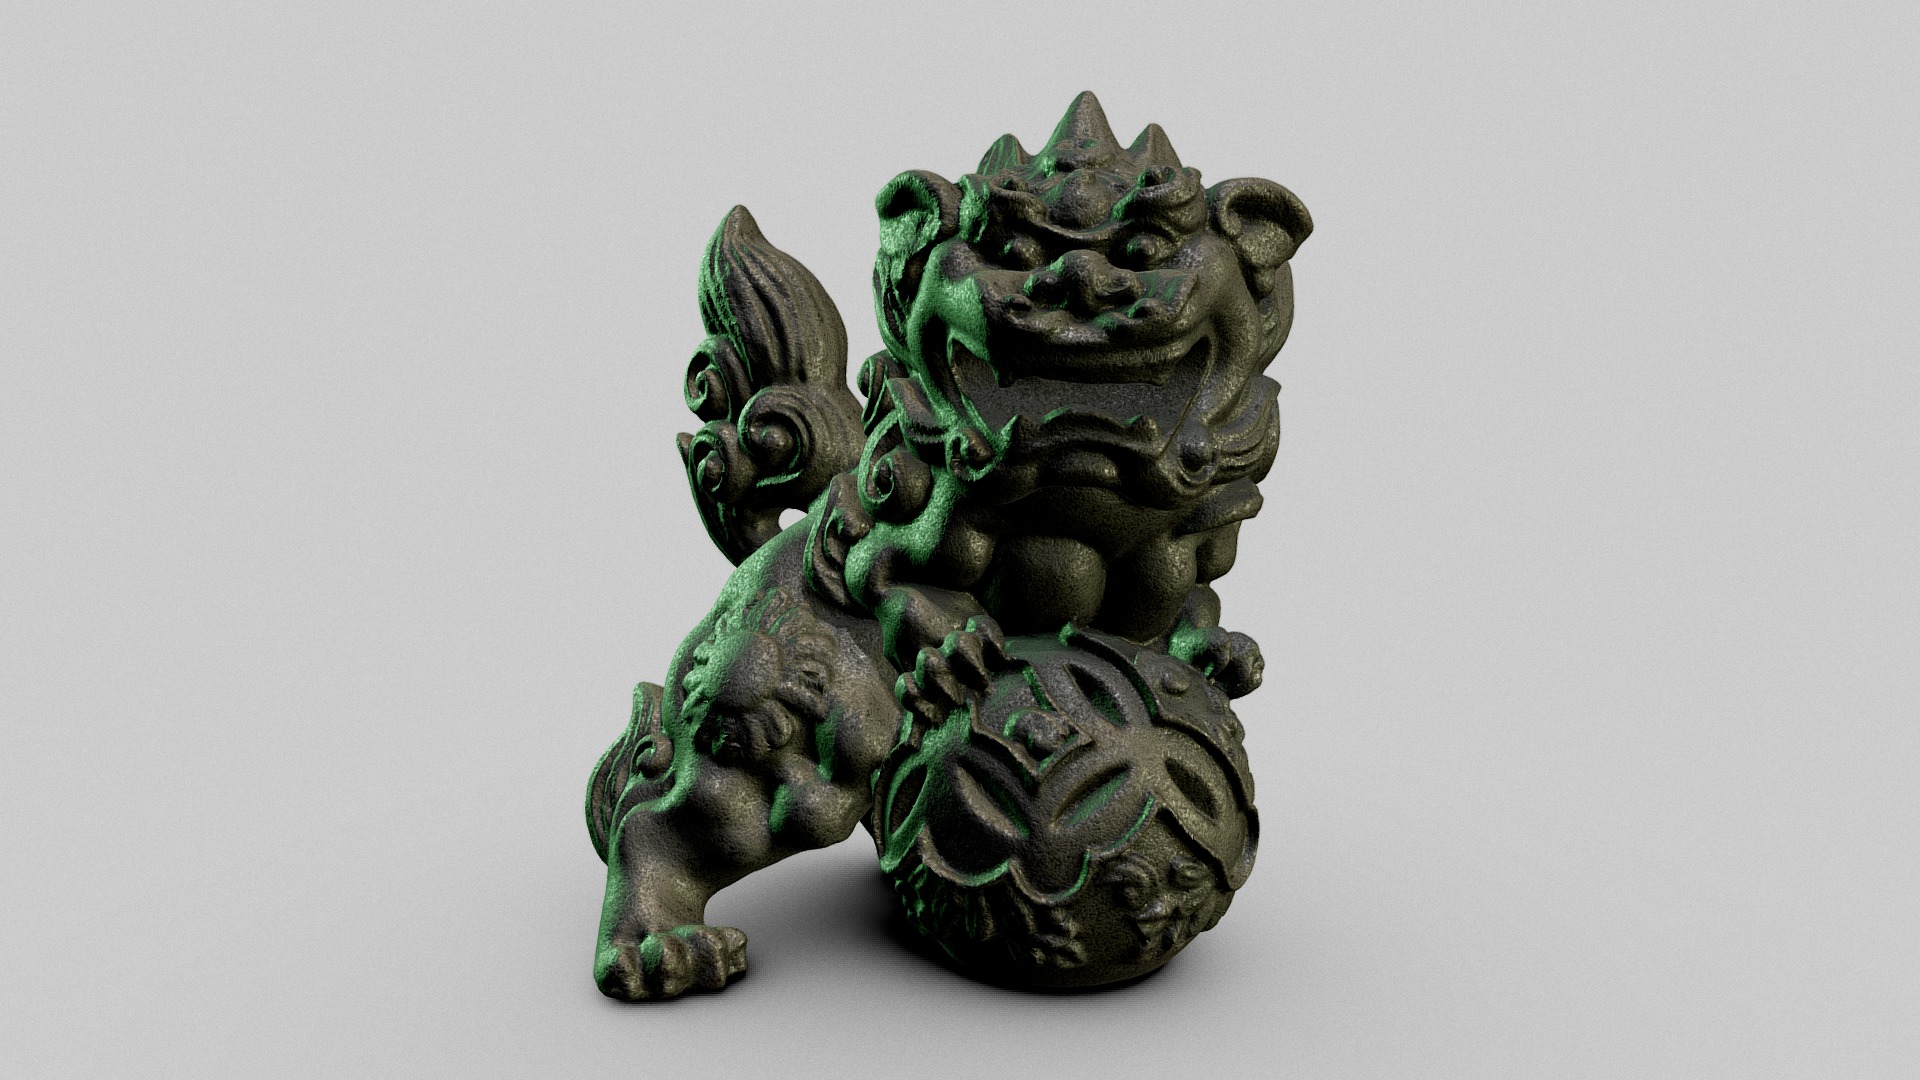 3D model Stone lion in Monkey Temple(photogrammetry） - This is a 3D model of the Stone lion in Monkey Temple(photogrammetry）. The 3D model is about a green statue of a turtle.